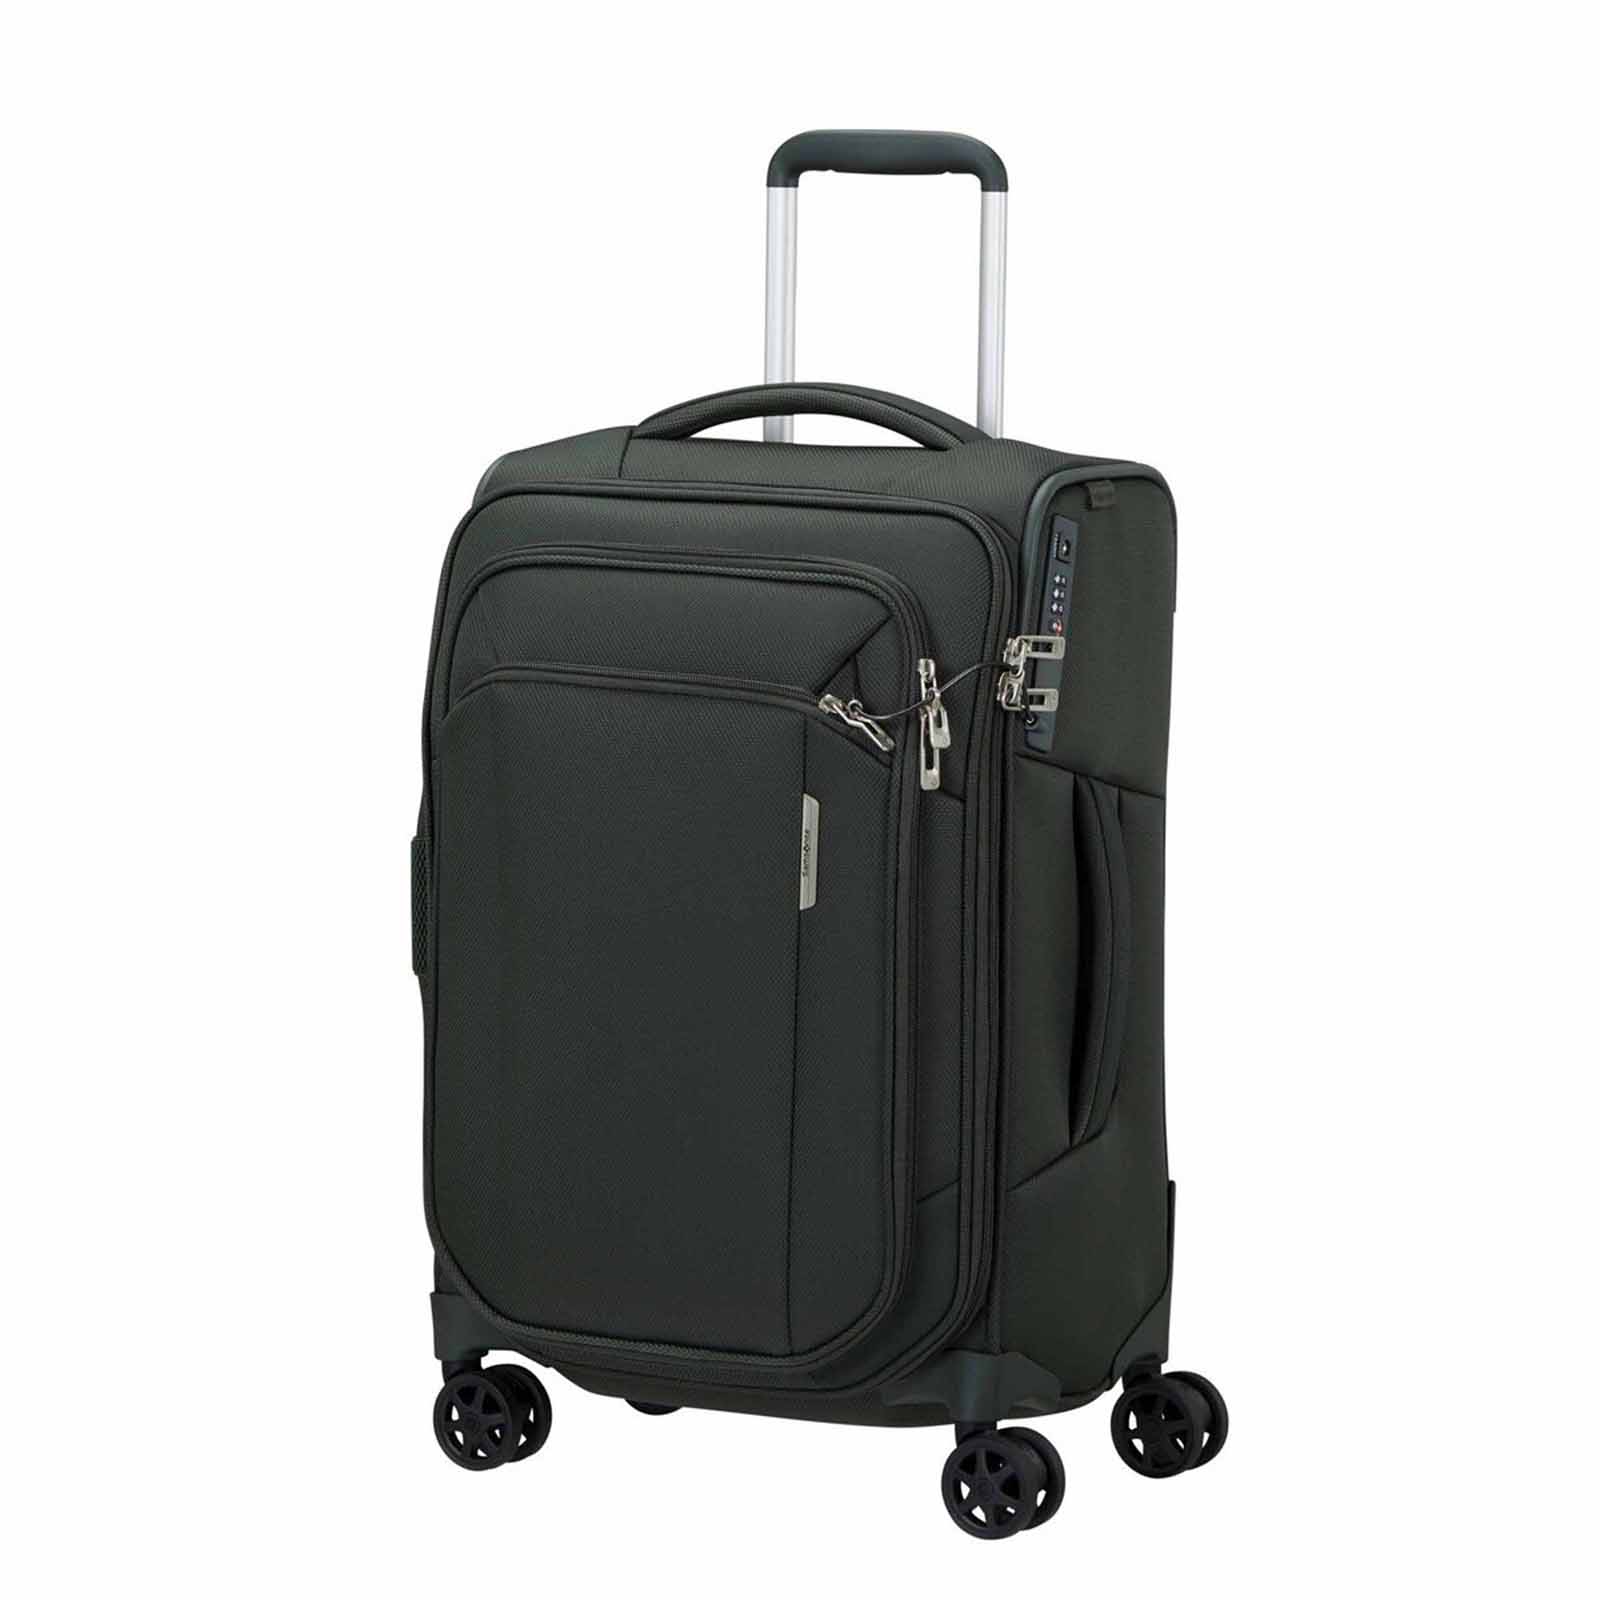 Samsonite-Respark-55cm-Carry-On-Suitcase-Forest-Green-Front-Angle